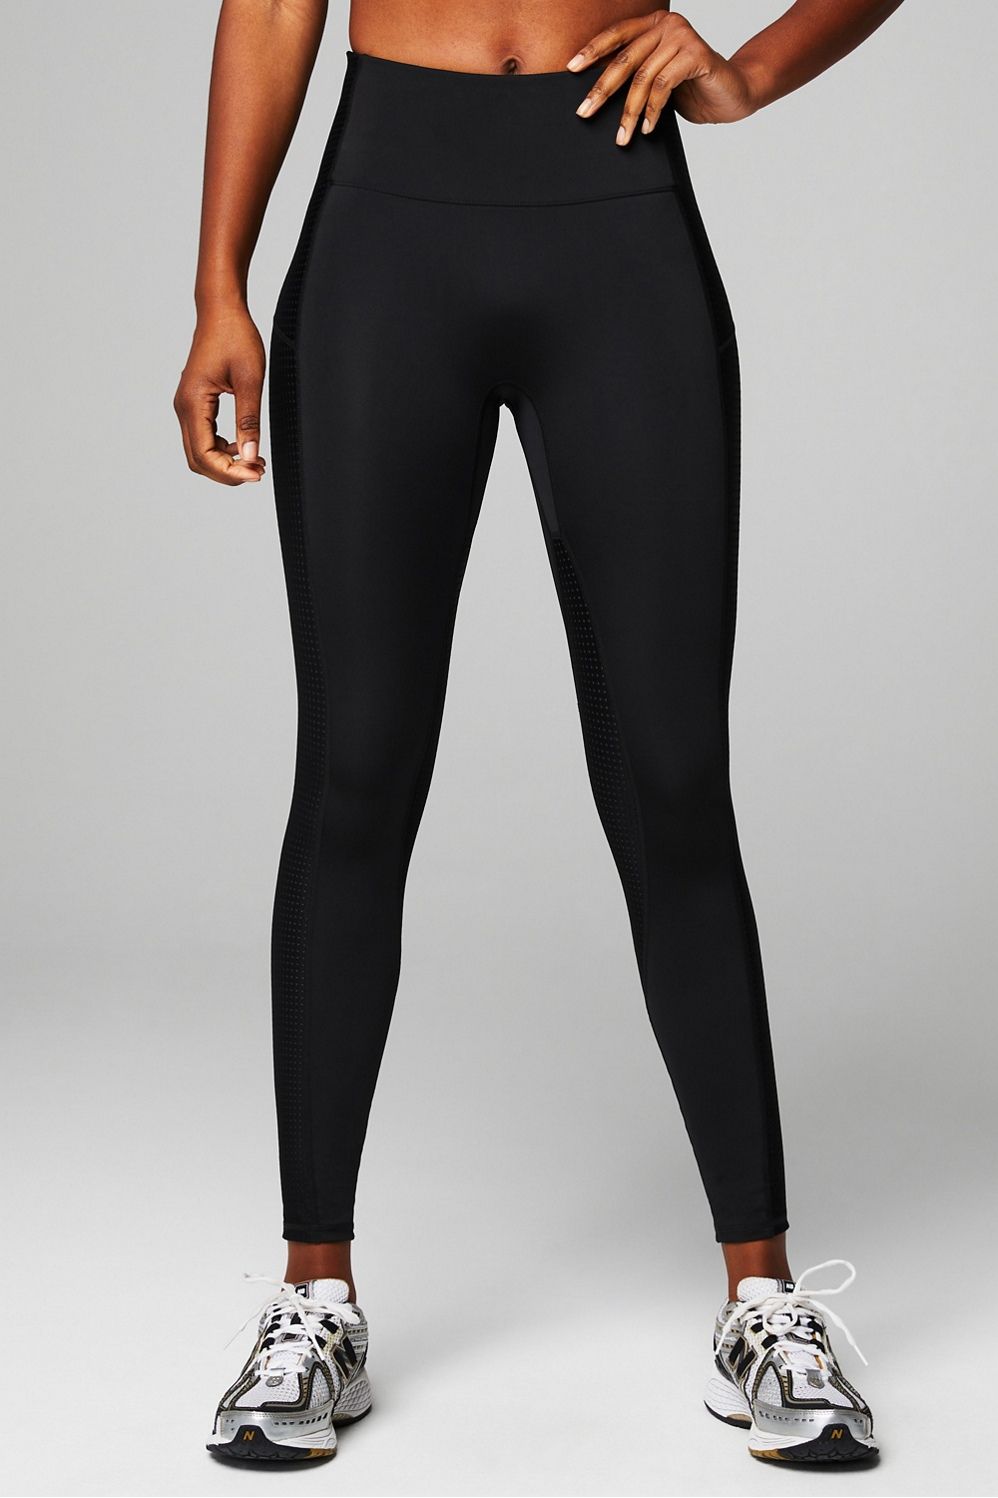 Motion365+ High-Waisted Legging | Fabletics - North America